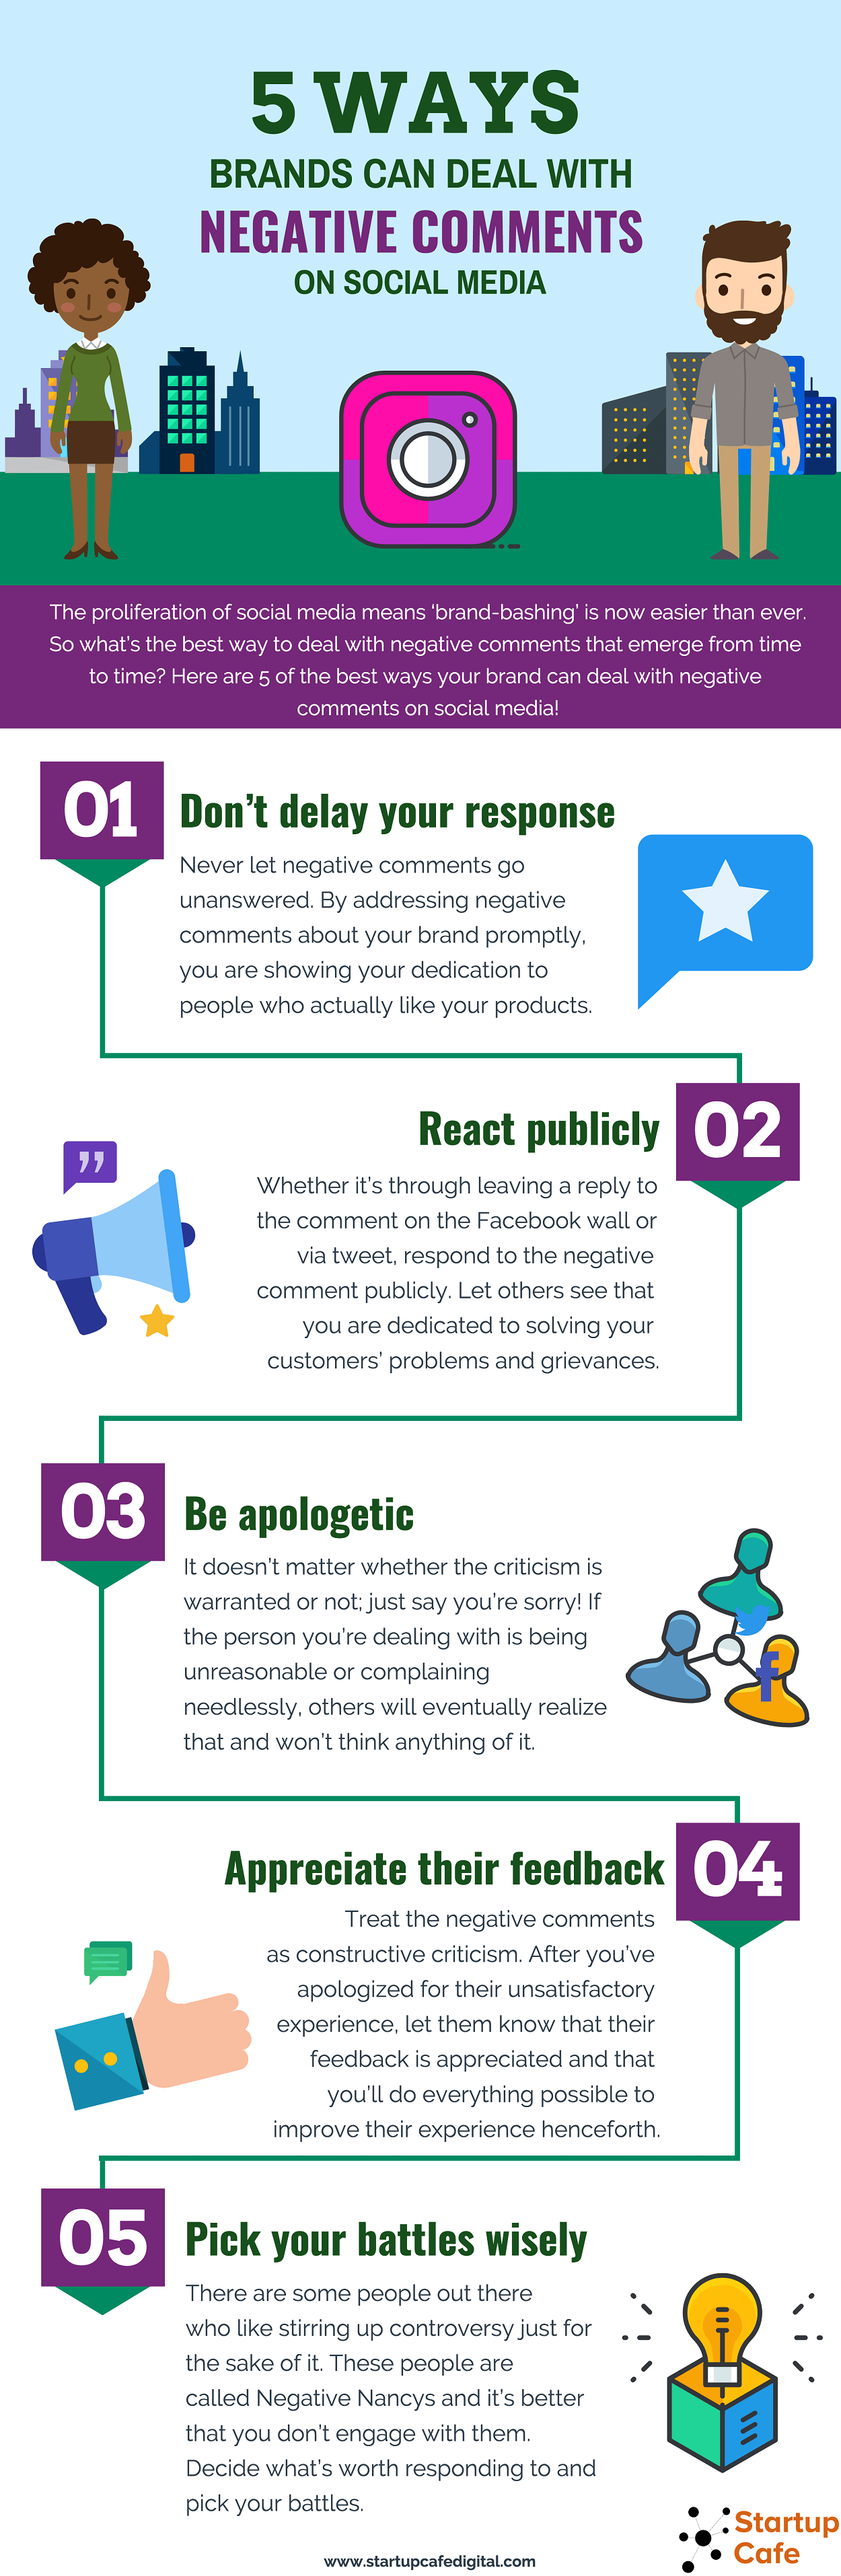 5 Ways Brands Can Deal With Negative Comments on Social Media #infographic